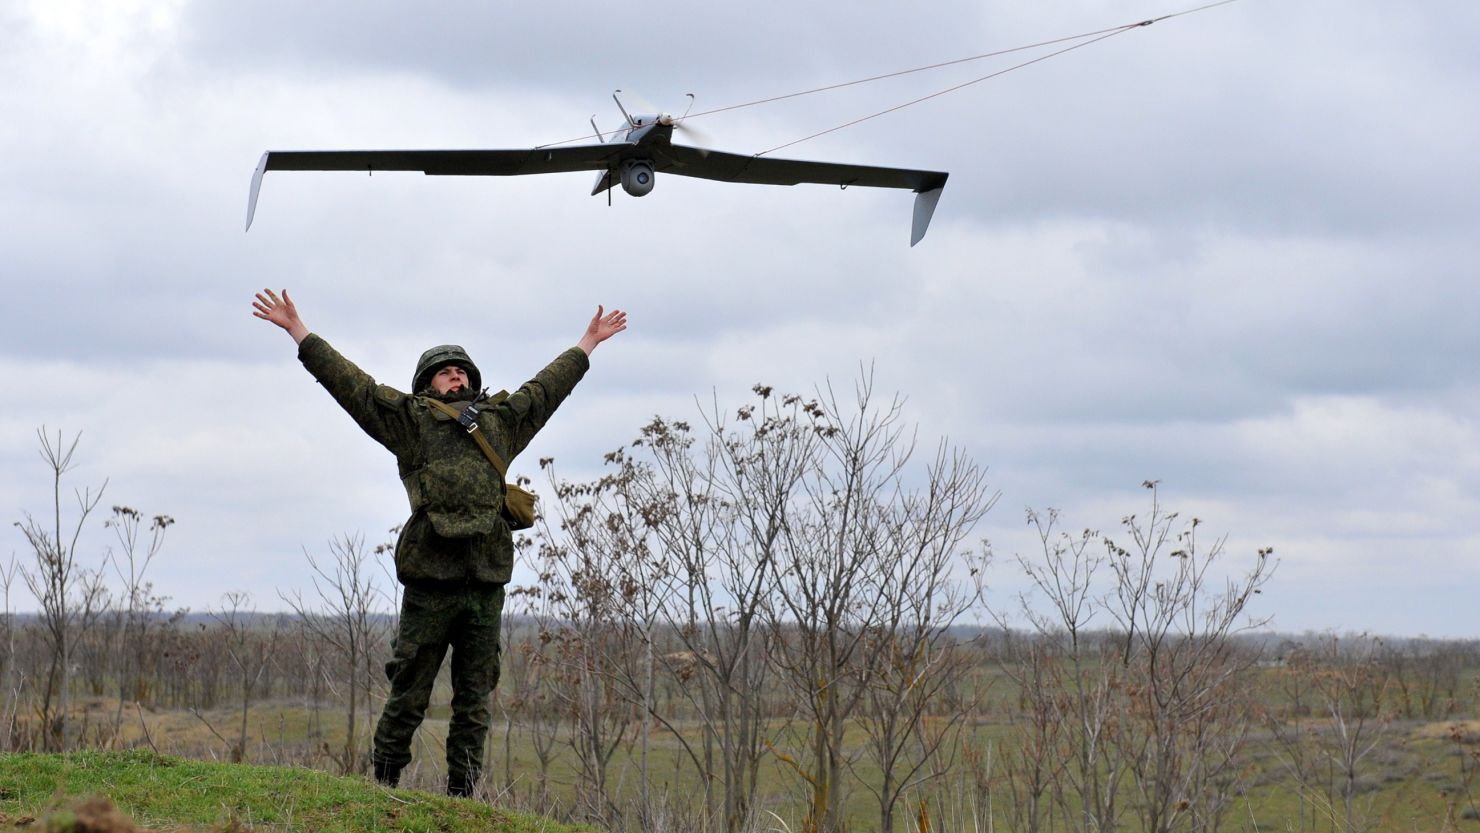 Russia is believed to have about 800 unarmed drones, many of them smaller vehicles similar to this one being deployed as part of Russian military drills in March.